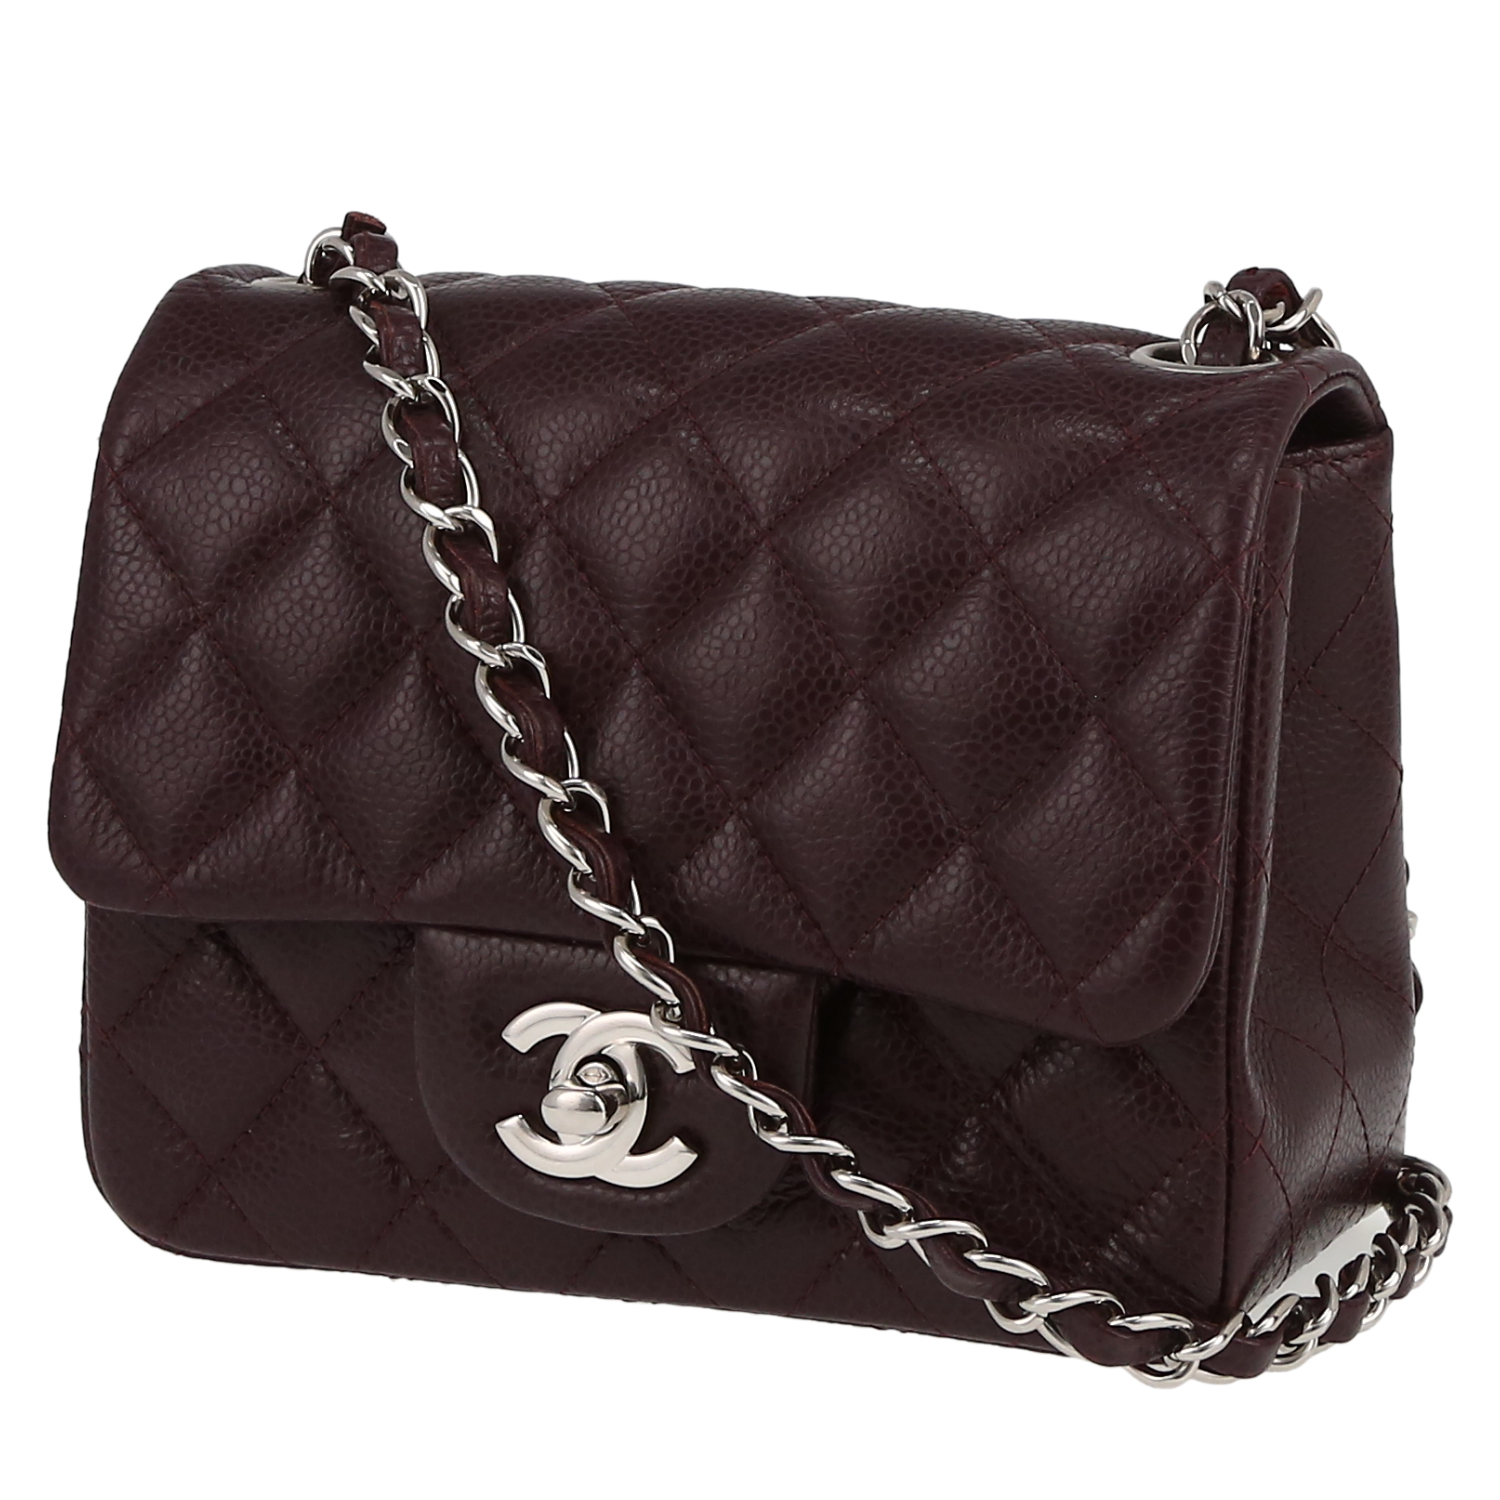 Chanel Timeless Medium Flap bag - Touched Vintage